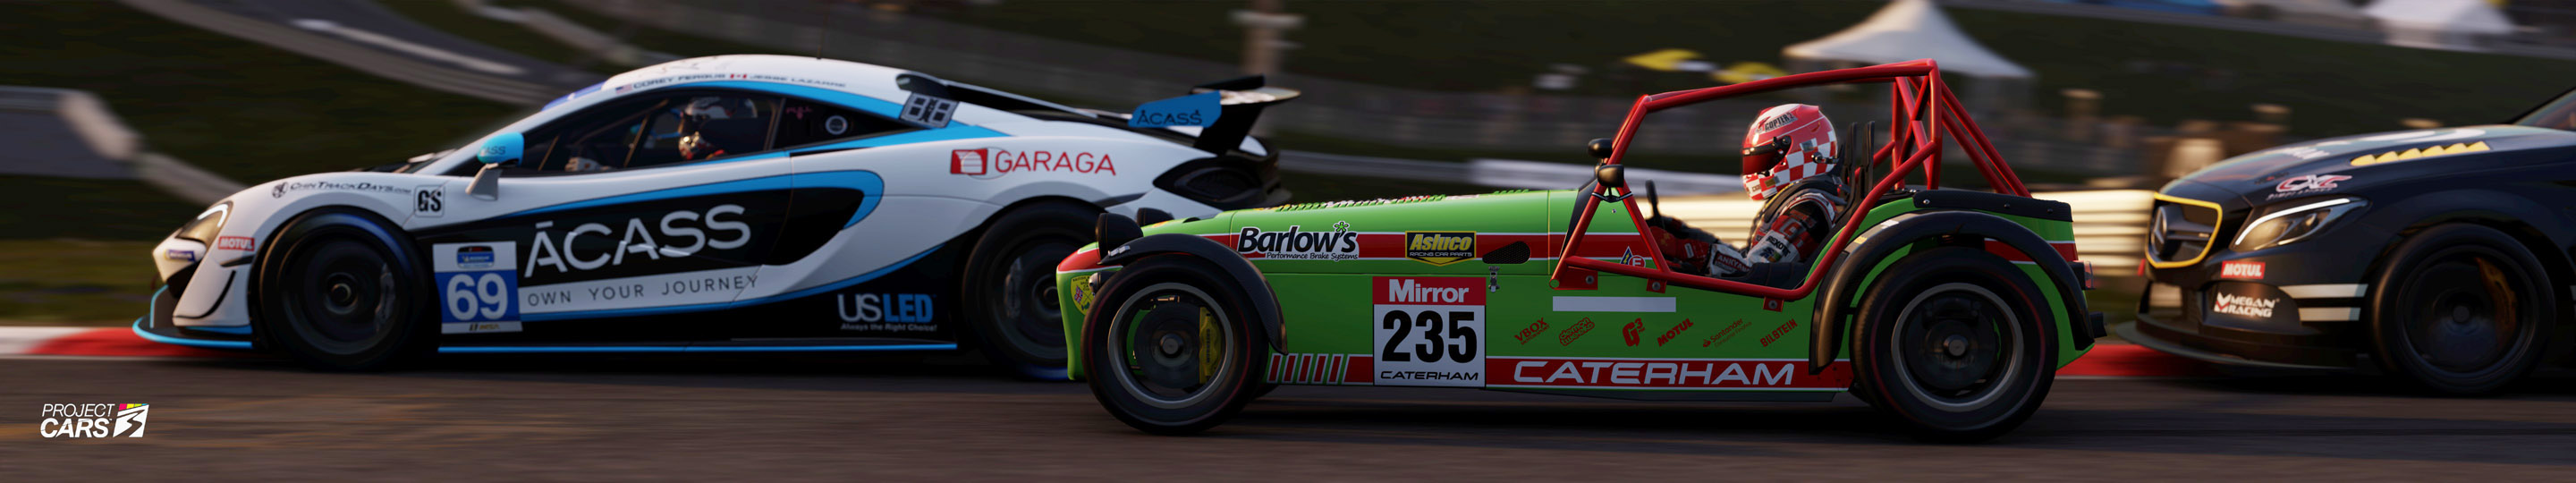 2 PROJECT CARS 3 CATERHAM 620R at BRANDS HATCH copy.jpg